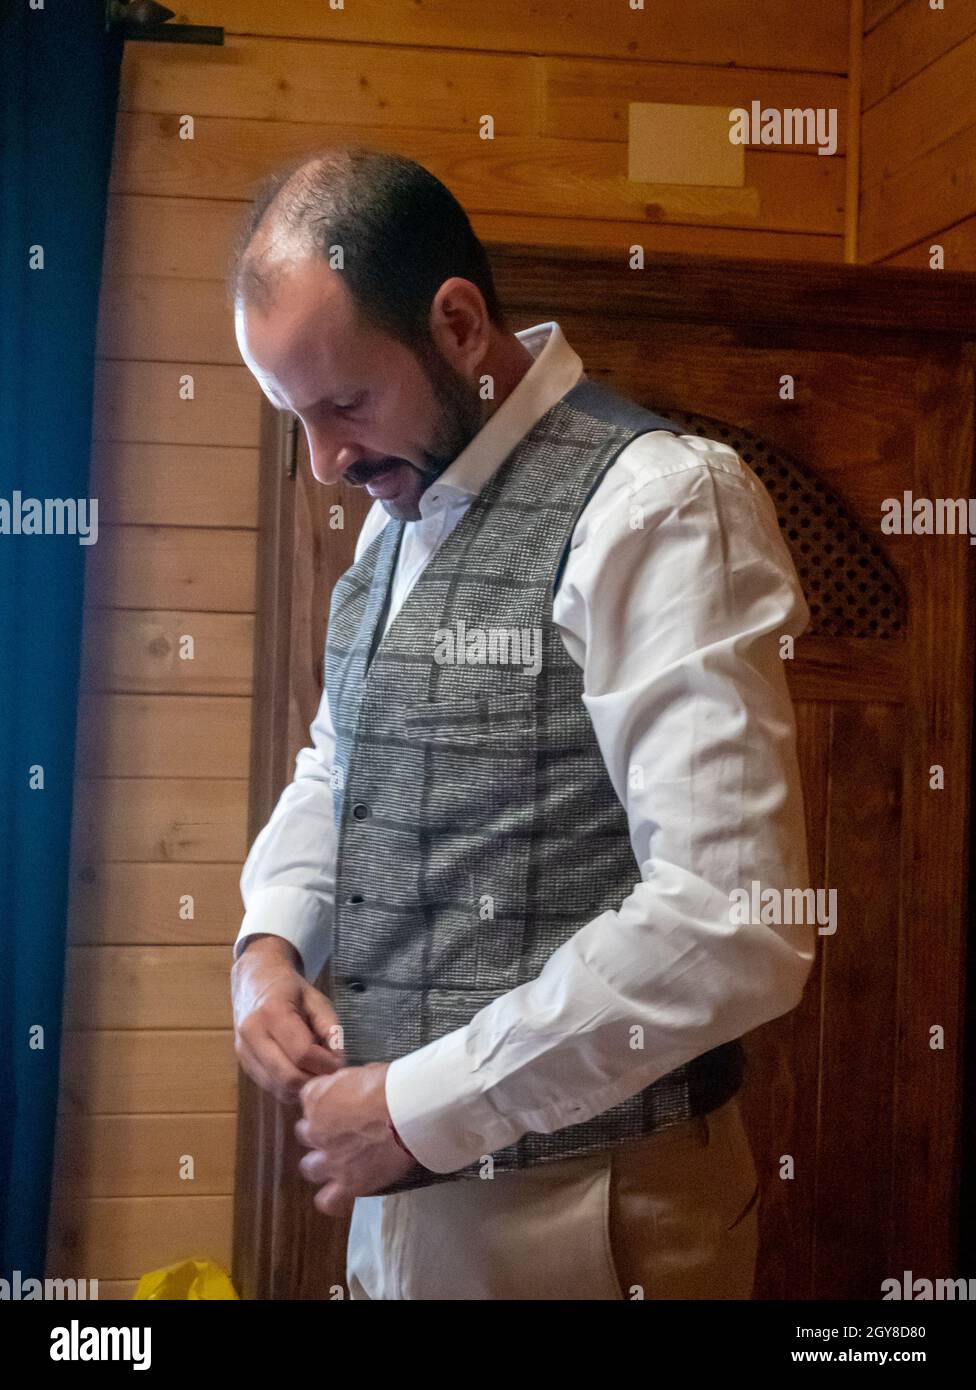 Spanish man in classical style wearing a vest Stock Photo - Alamy